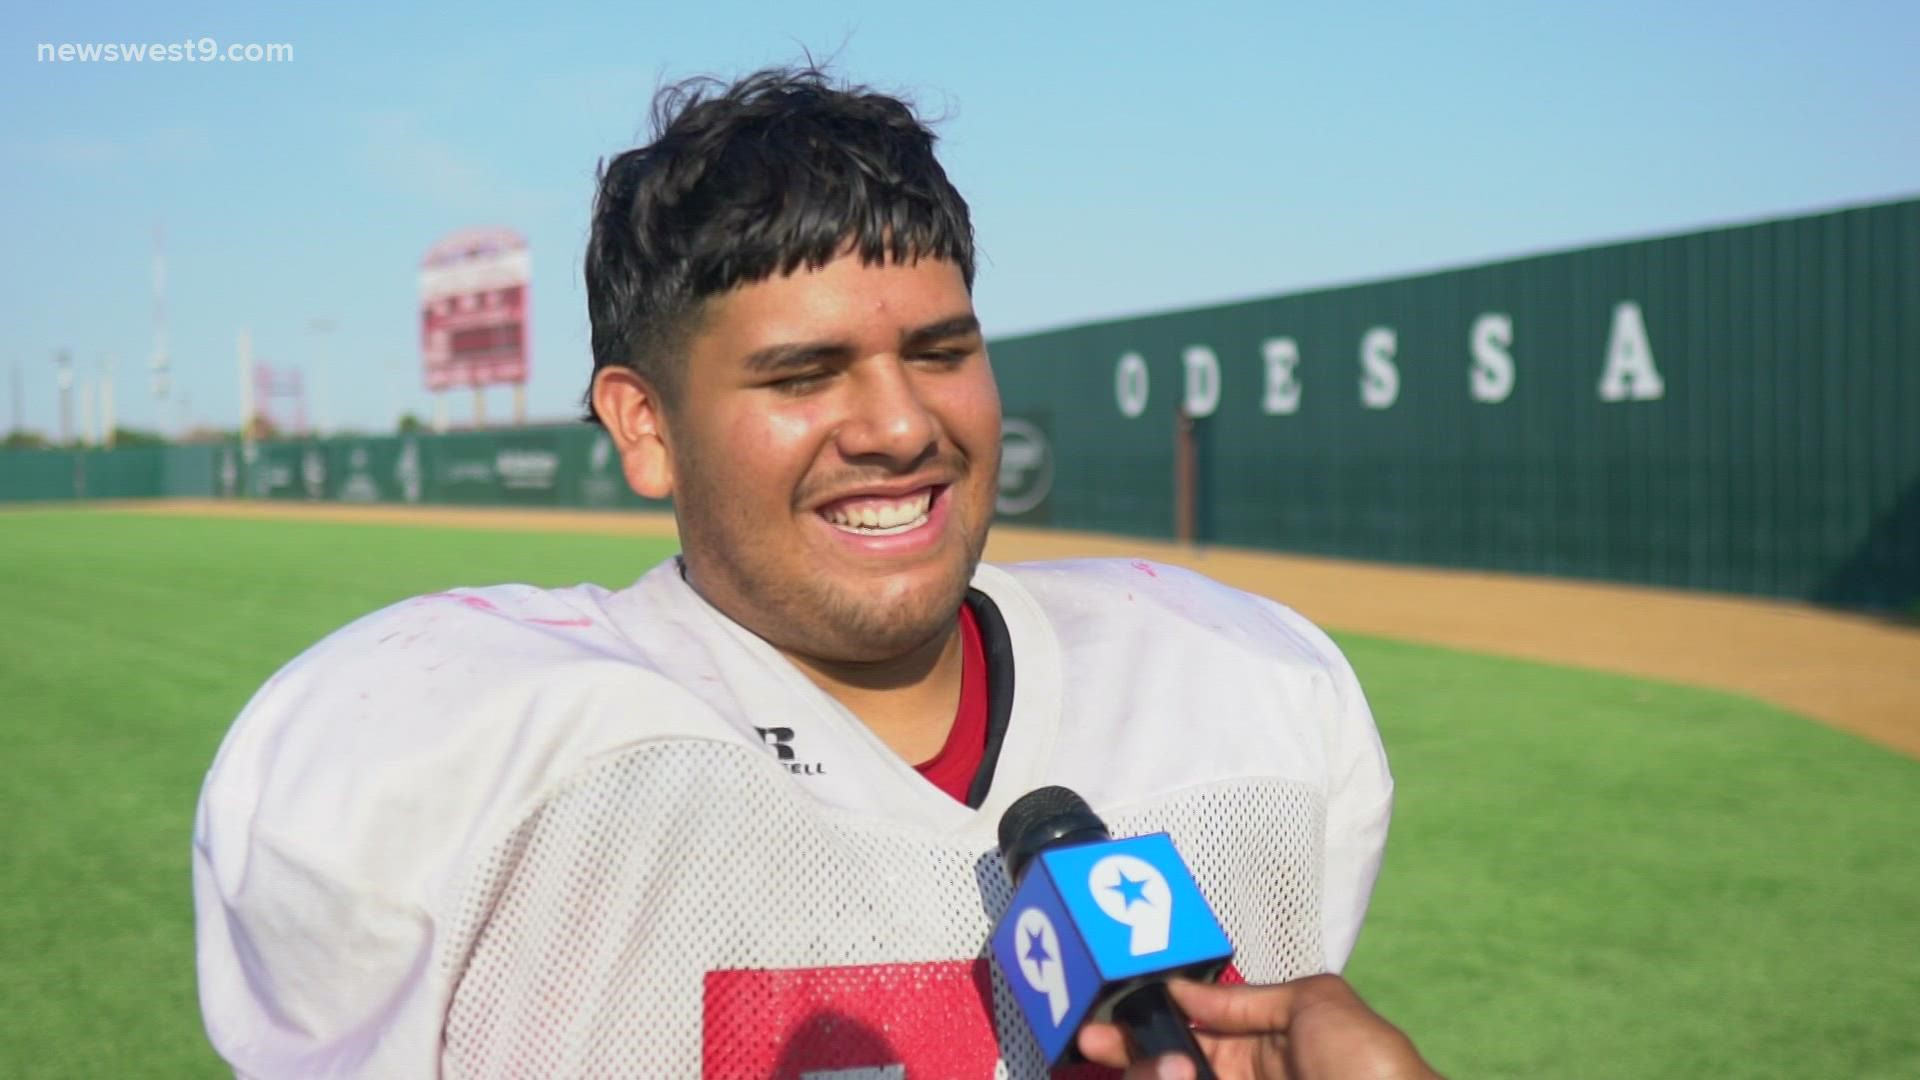 OHS is looking for a fresh start with new head coach Dusty Ortiz